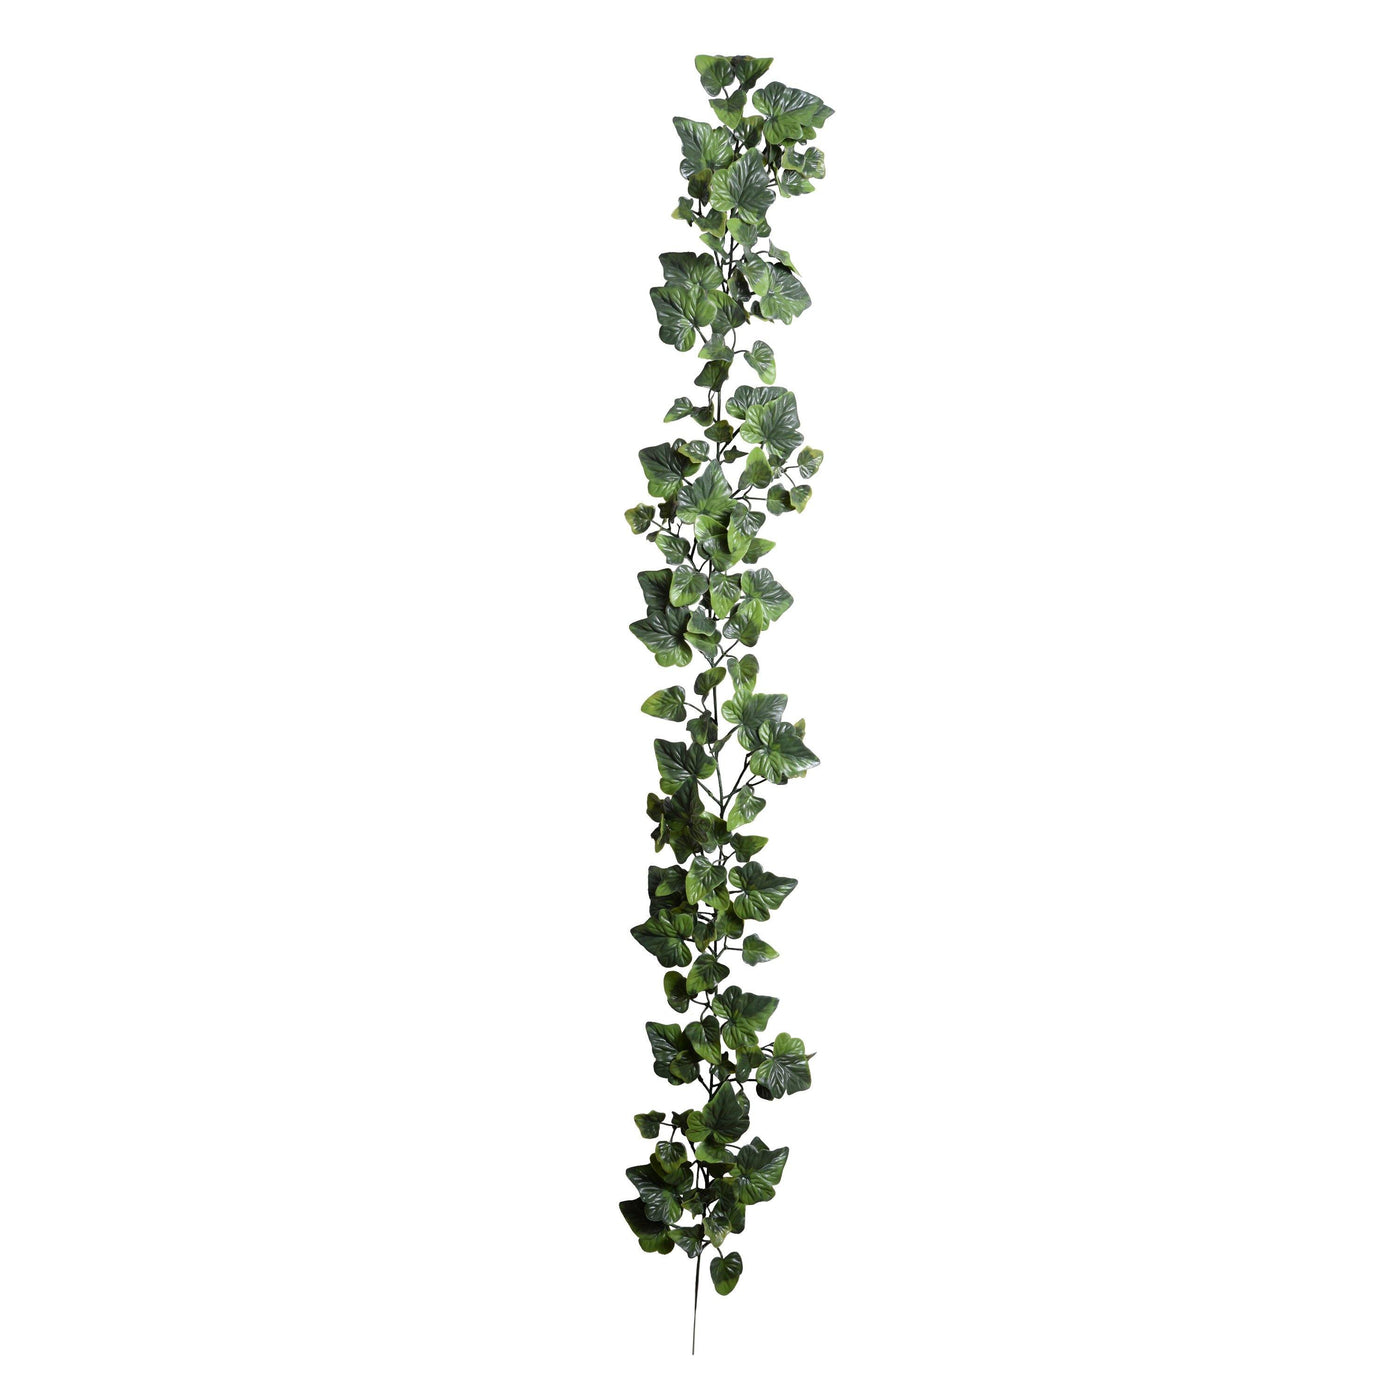 Wholesale Artificial Garland, Ivy Vine Outdoor 6 Foot Long - Enduraleaf by New Growth Designs